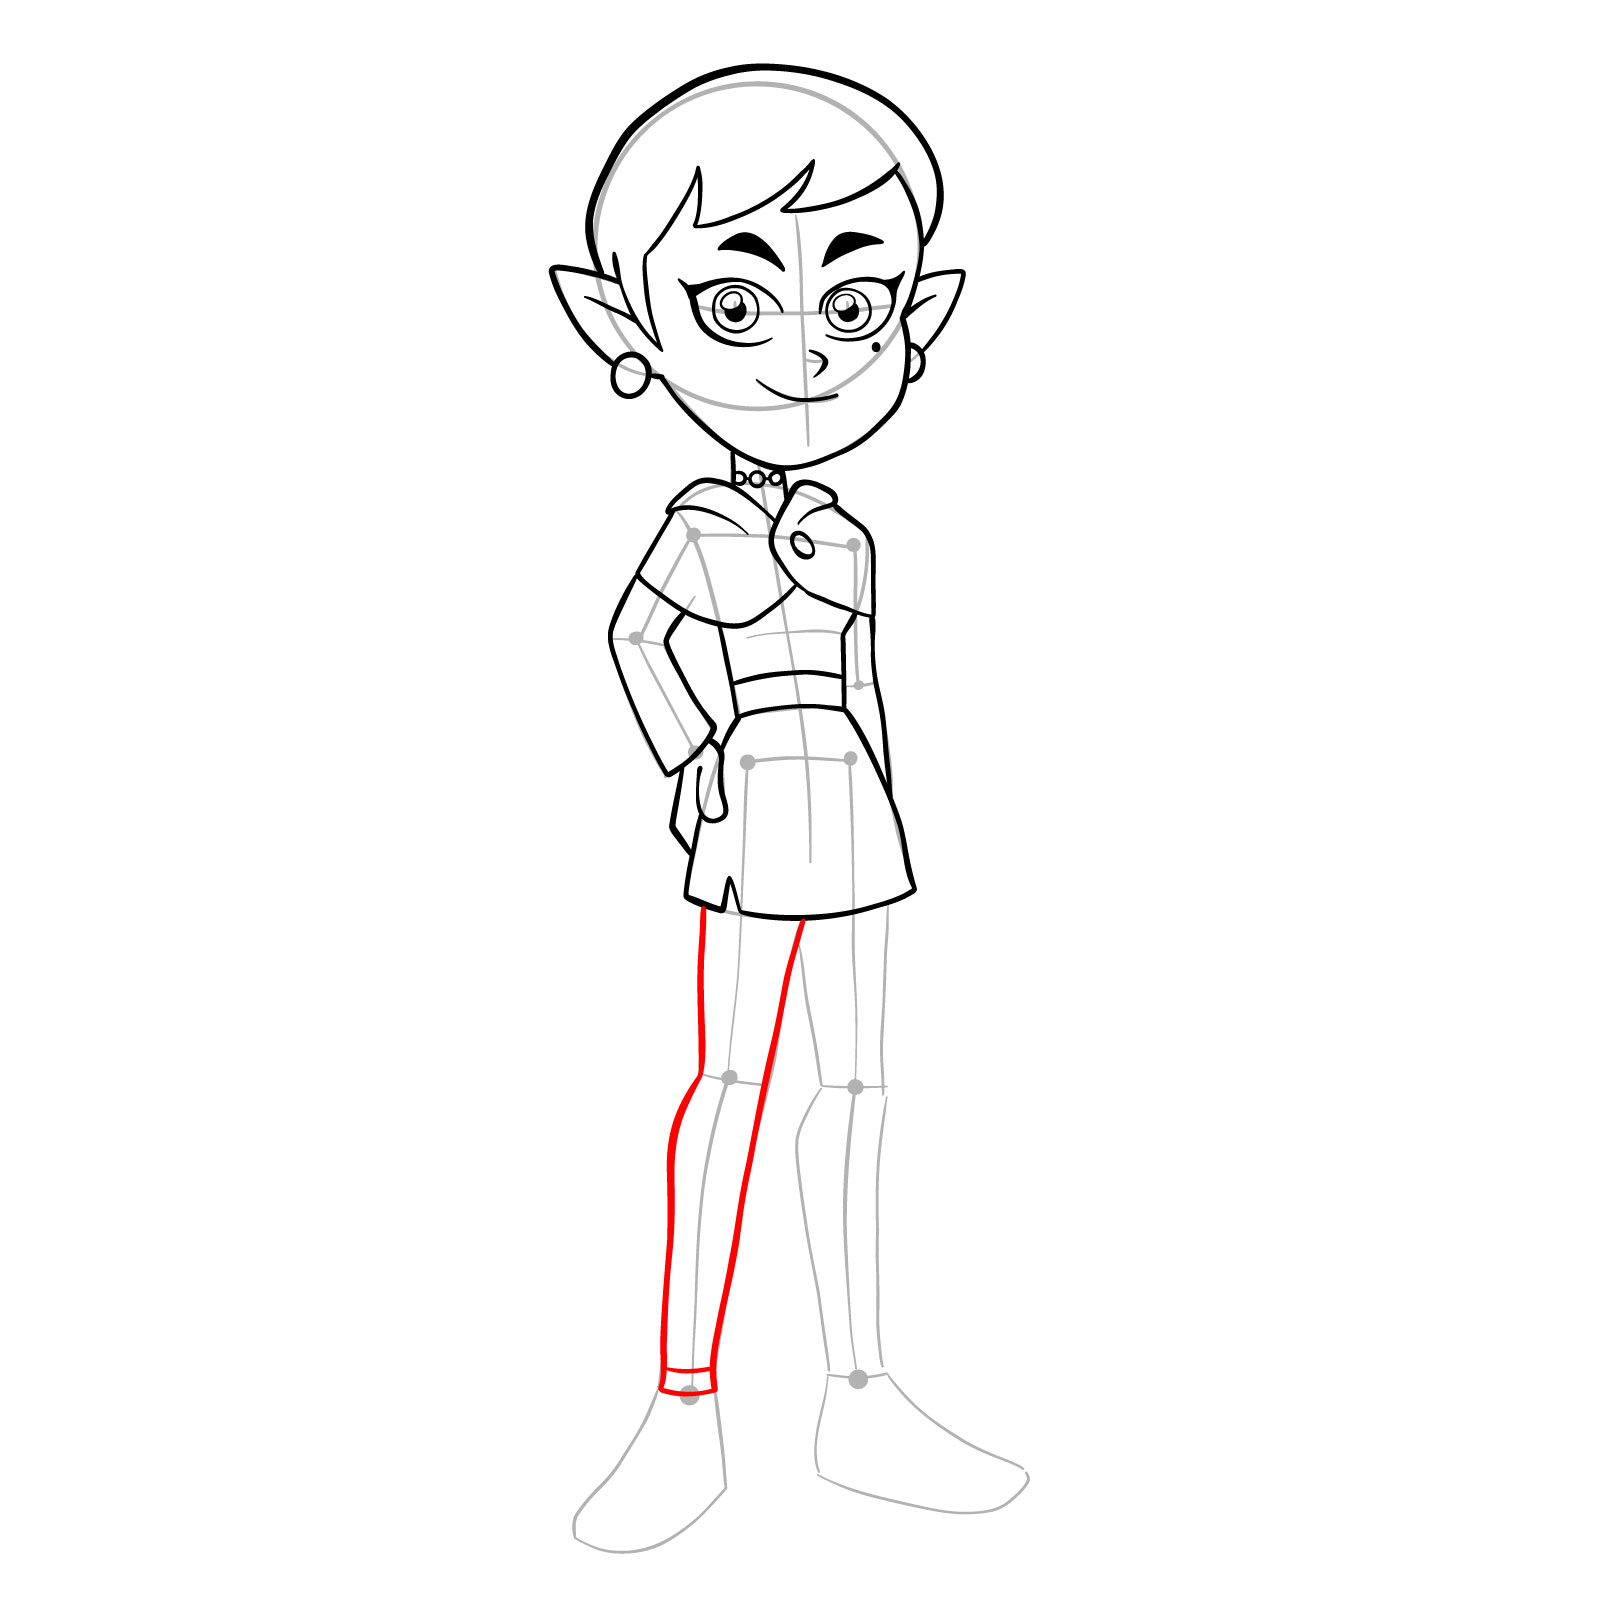 How to draw Emira Blight from The Owl House - step 20